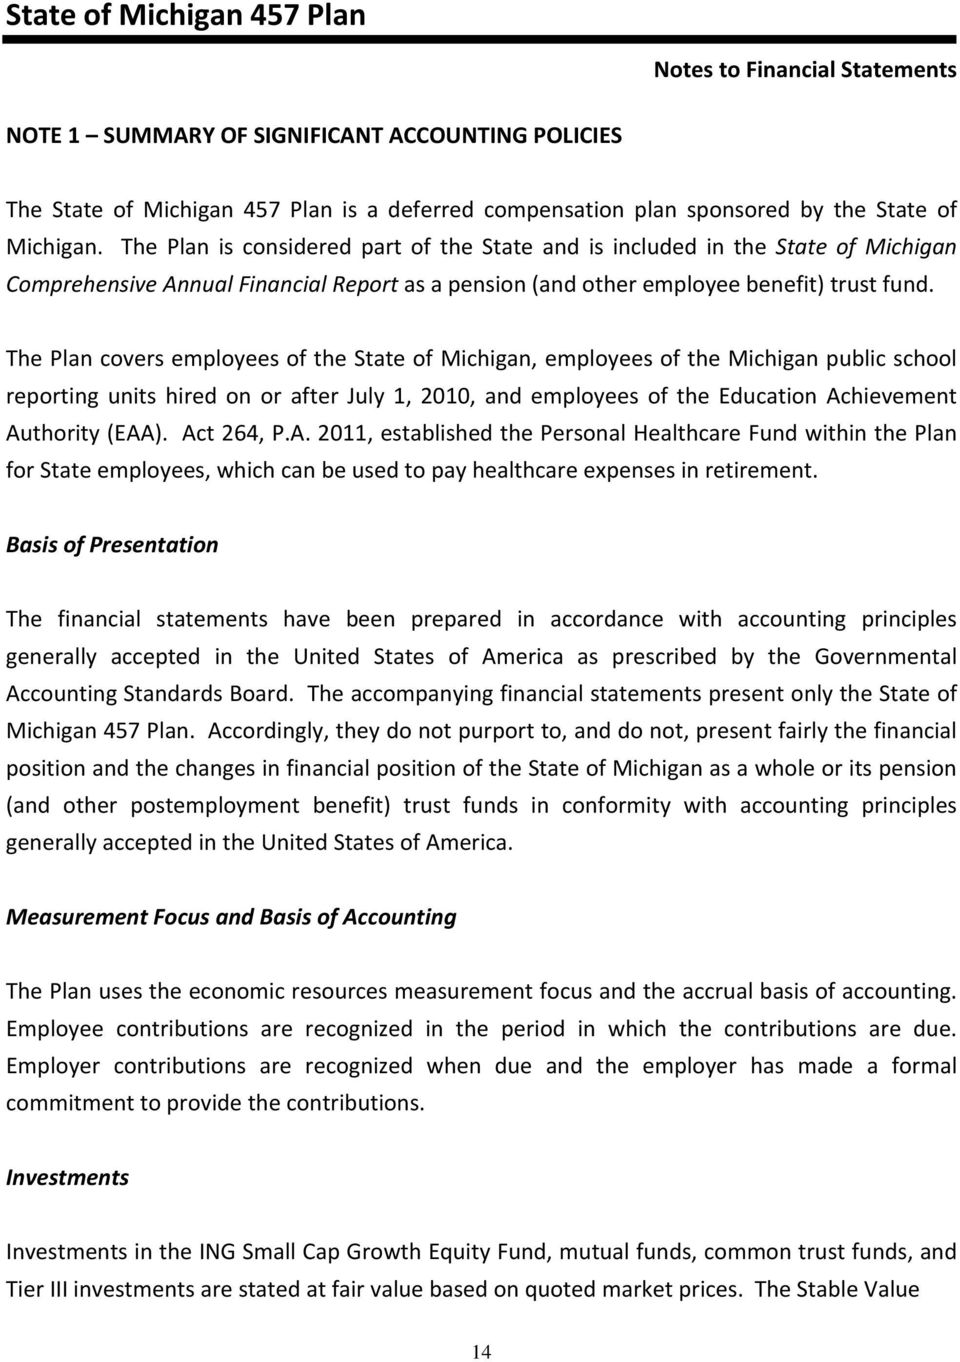 The Plan covers employees of the State of Michigan, employees of the Michigan public school reporting units hired on or after July 1, 2010, and employees of the Education Achievement Authority (EAA).